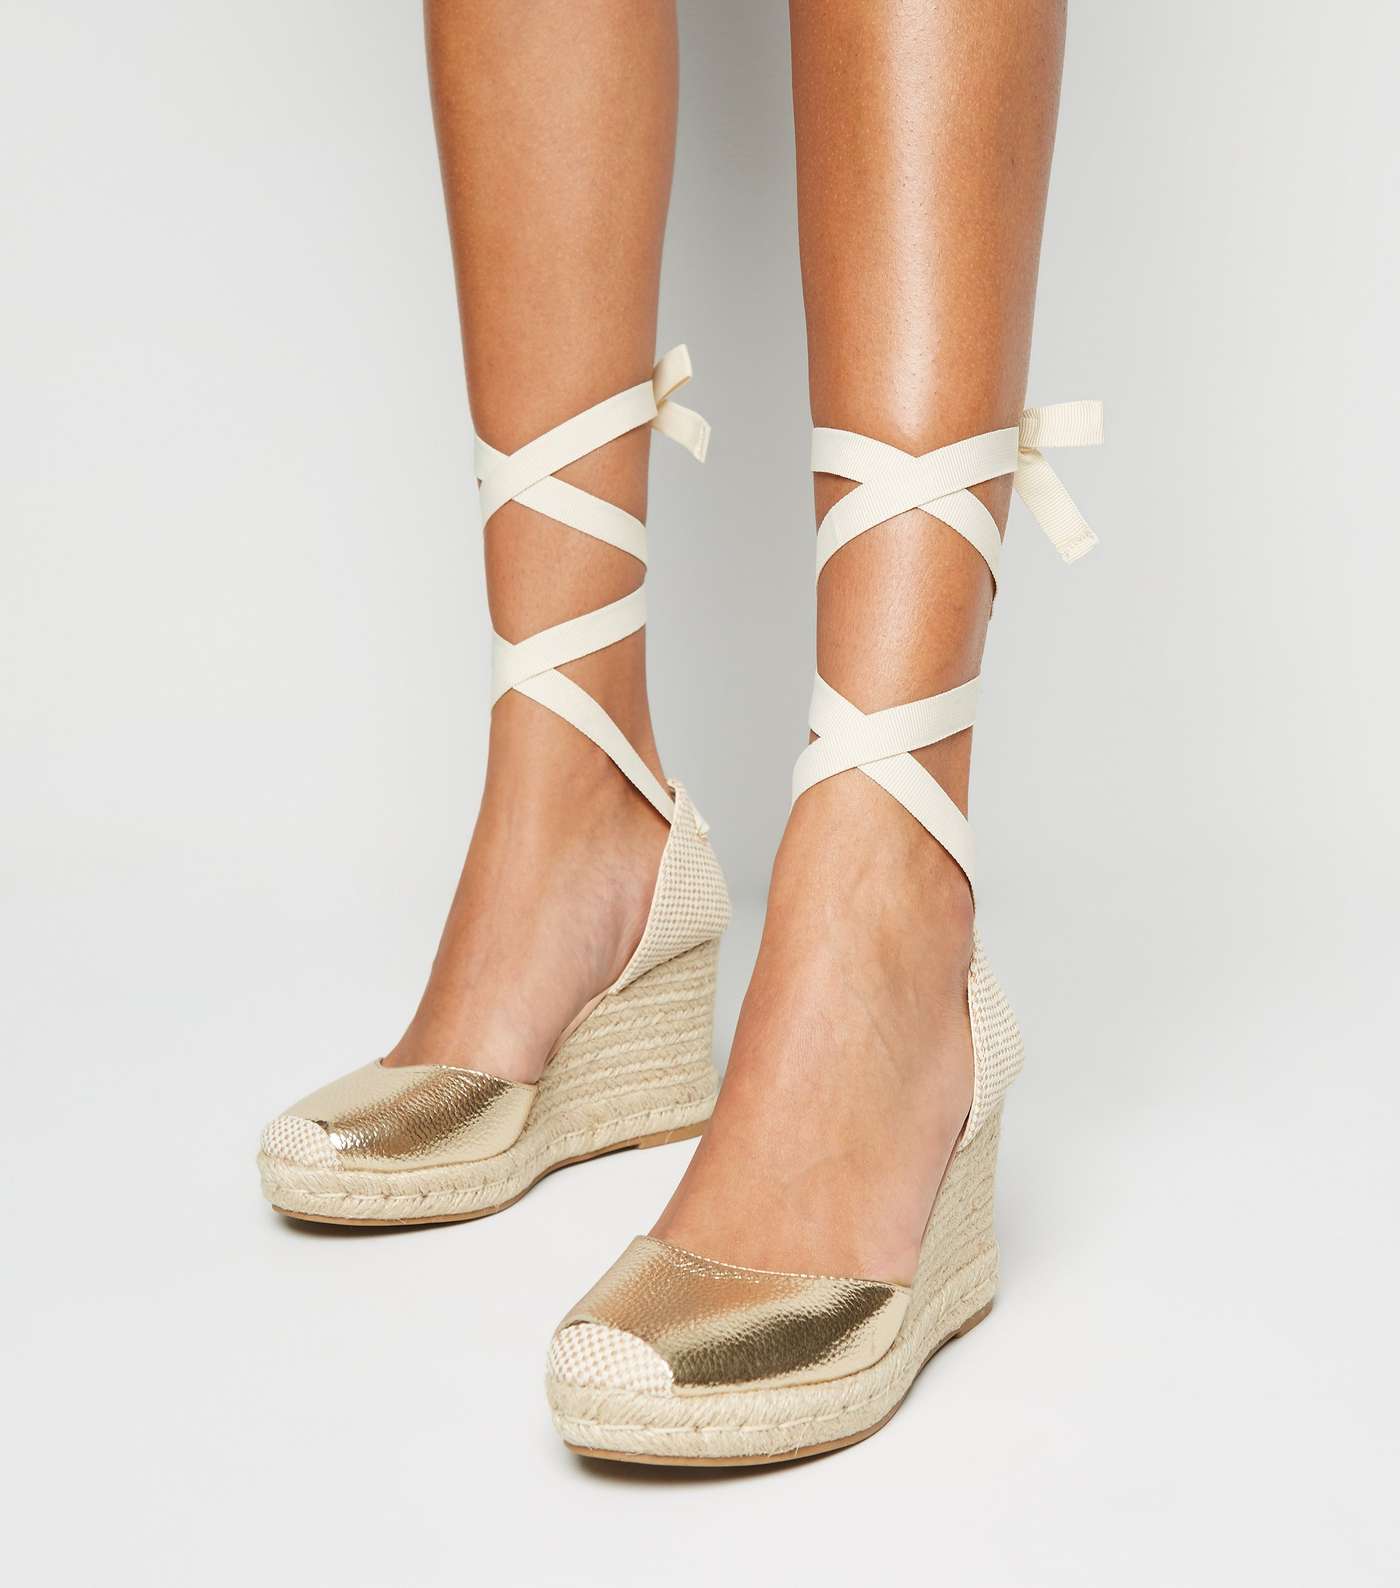 Gold Ankle Tie Espadrille Wedges Image 2